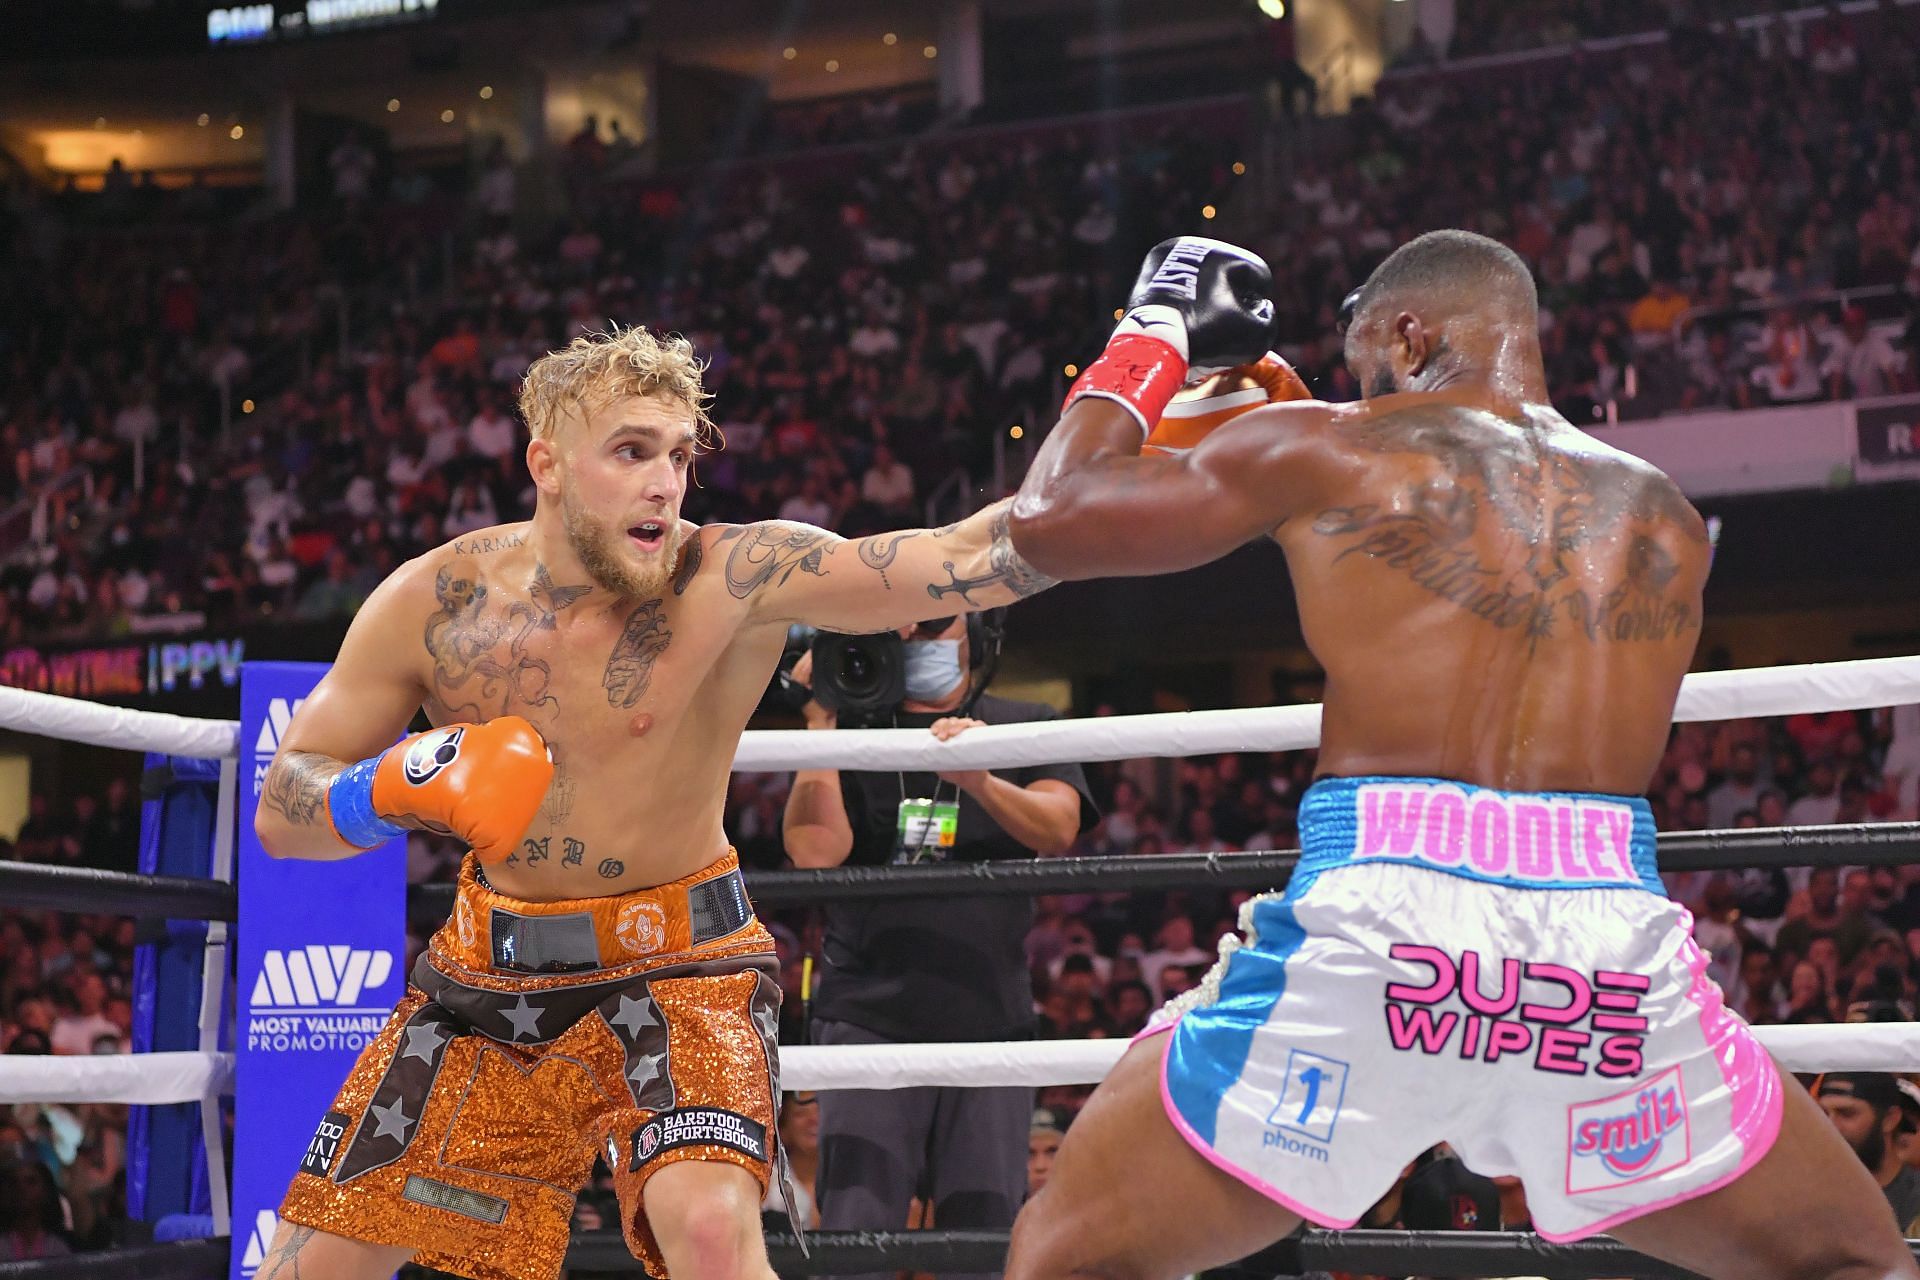 Jake Paul, YouTuber turned boxer, in action.